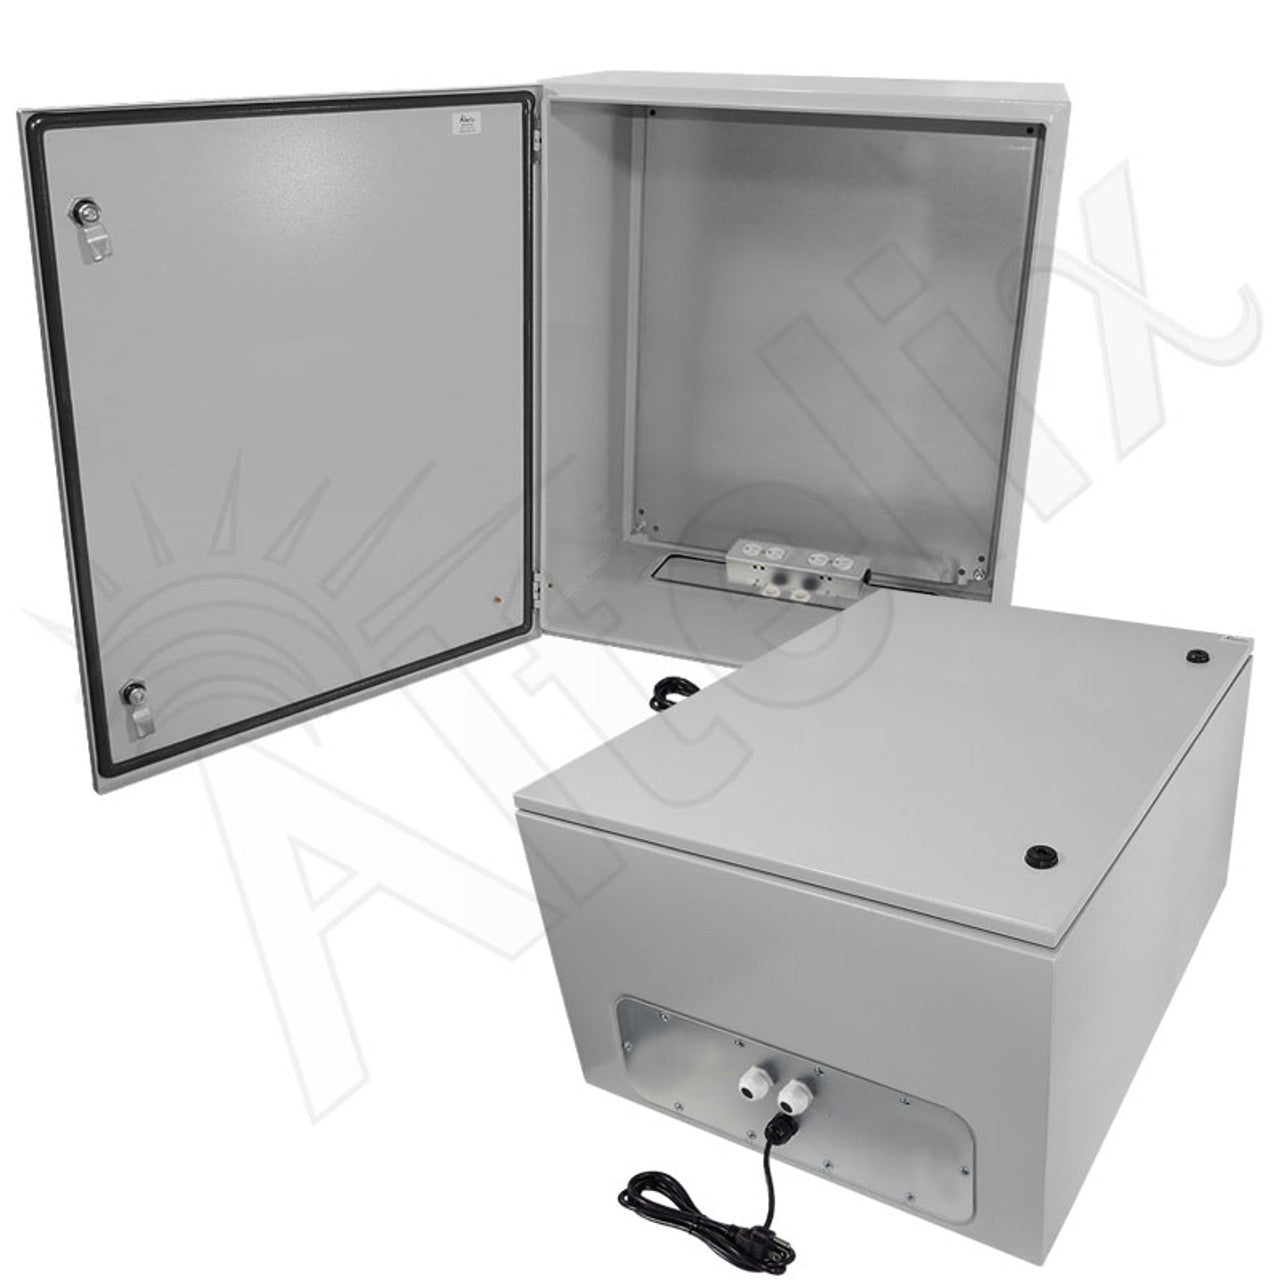 Altelix NEMA 4X Steel Weatherproof Enclosure with 120 VAC Outlets and Power Cord-9